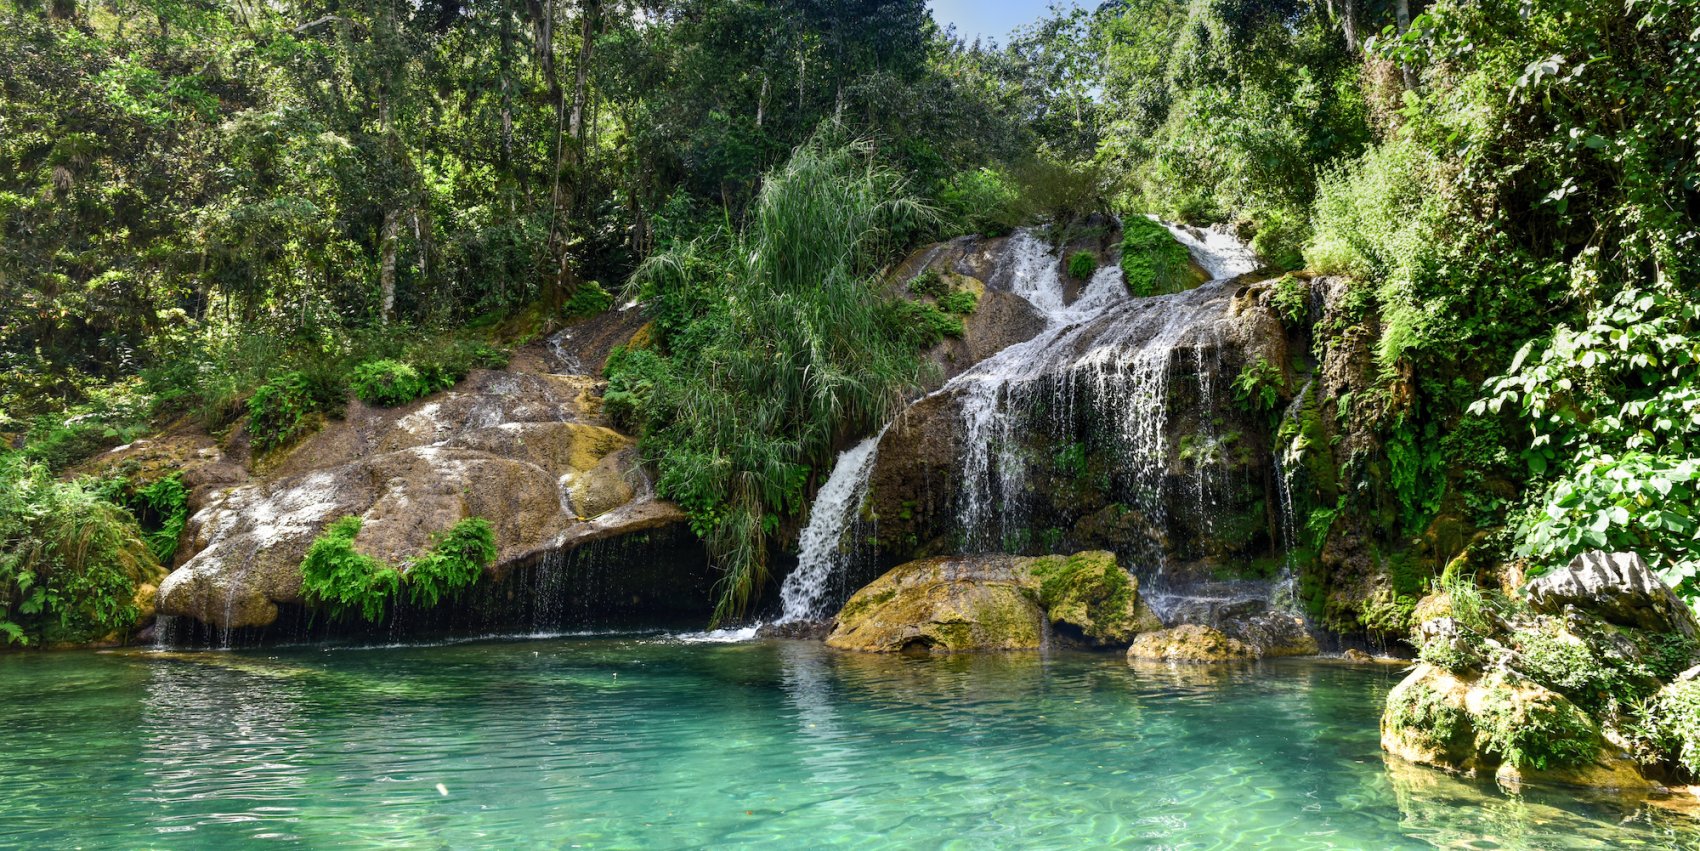 Waterfall going into a crystal clear pool in Desembarco del Granma National Park on a sunny day